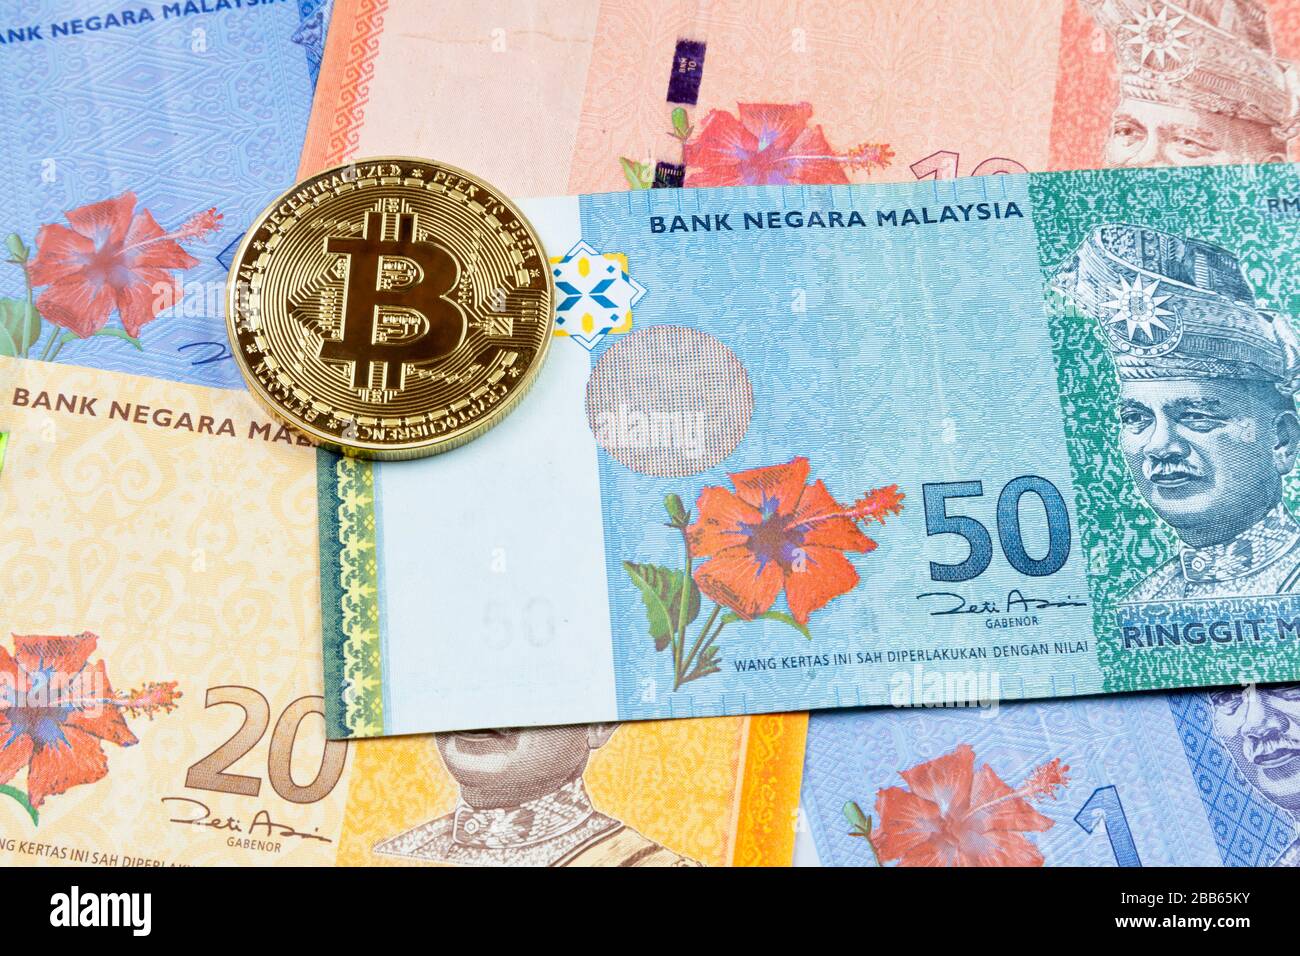 Close-up on a golden Bitcoin coin on top of a stack of Malaysian Ringgit banknotes. Stock Photo